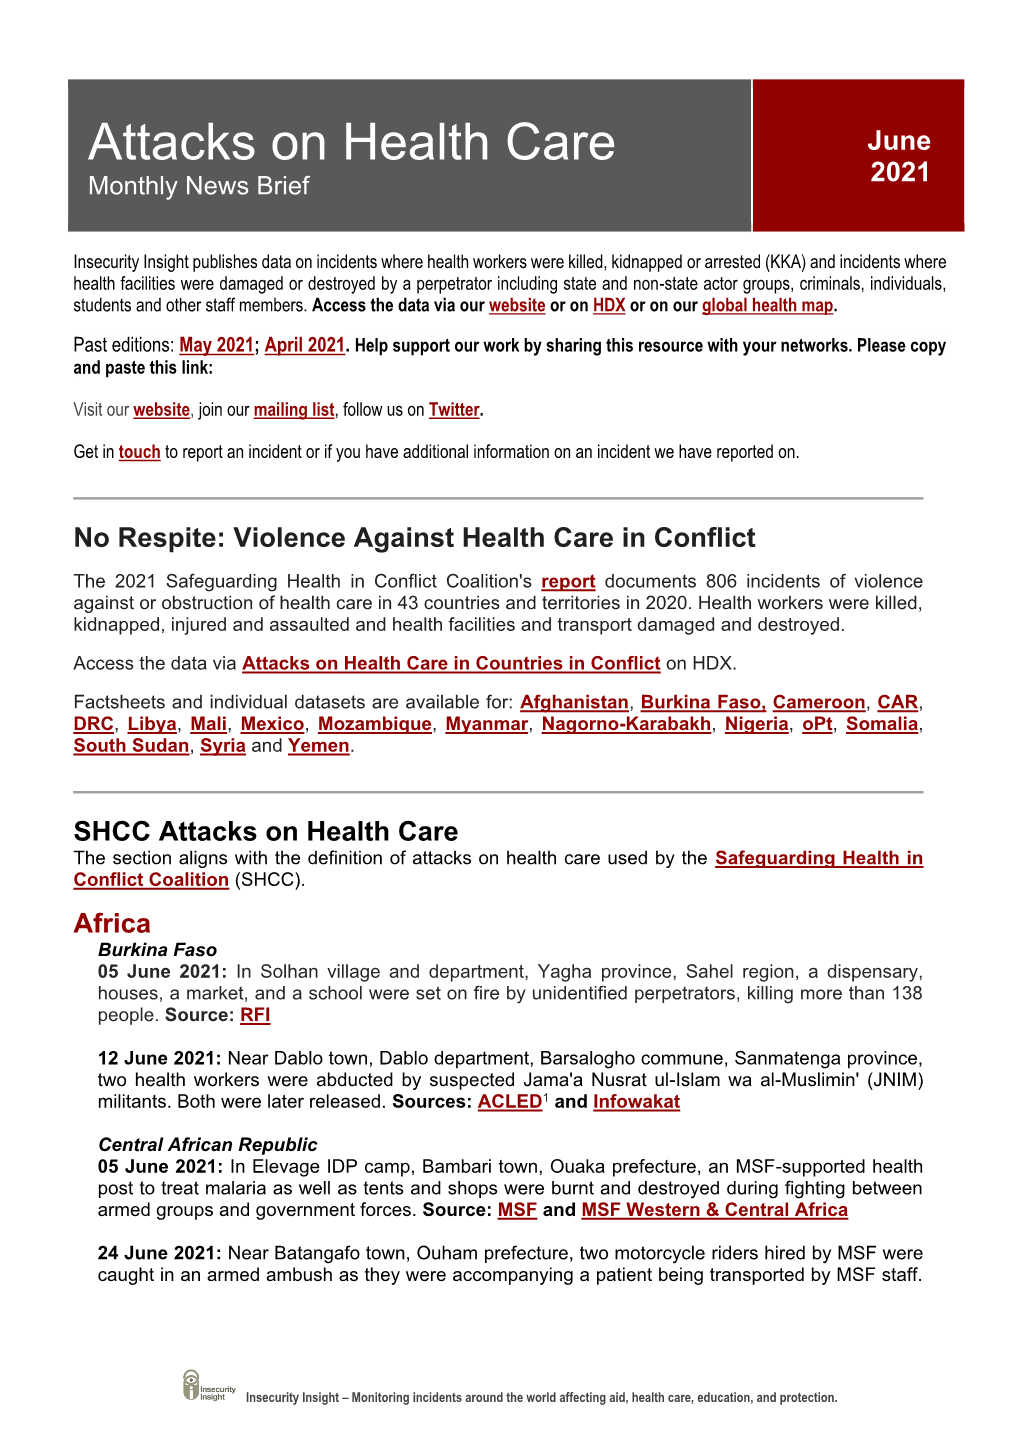 Attacks on Health Care Monthly News Brief, June 2021